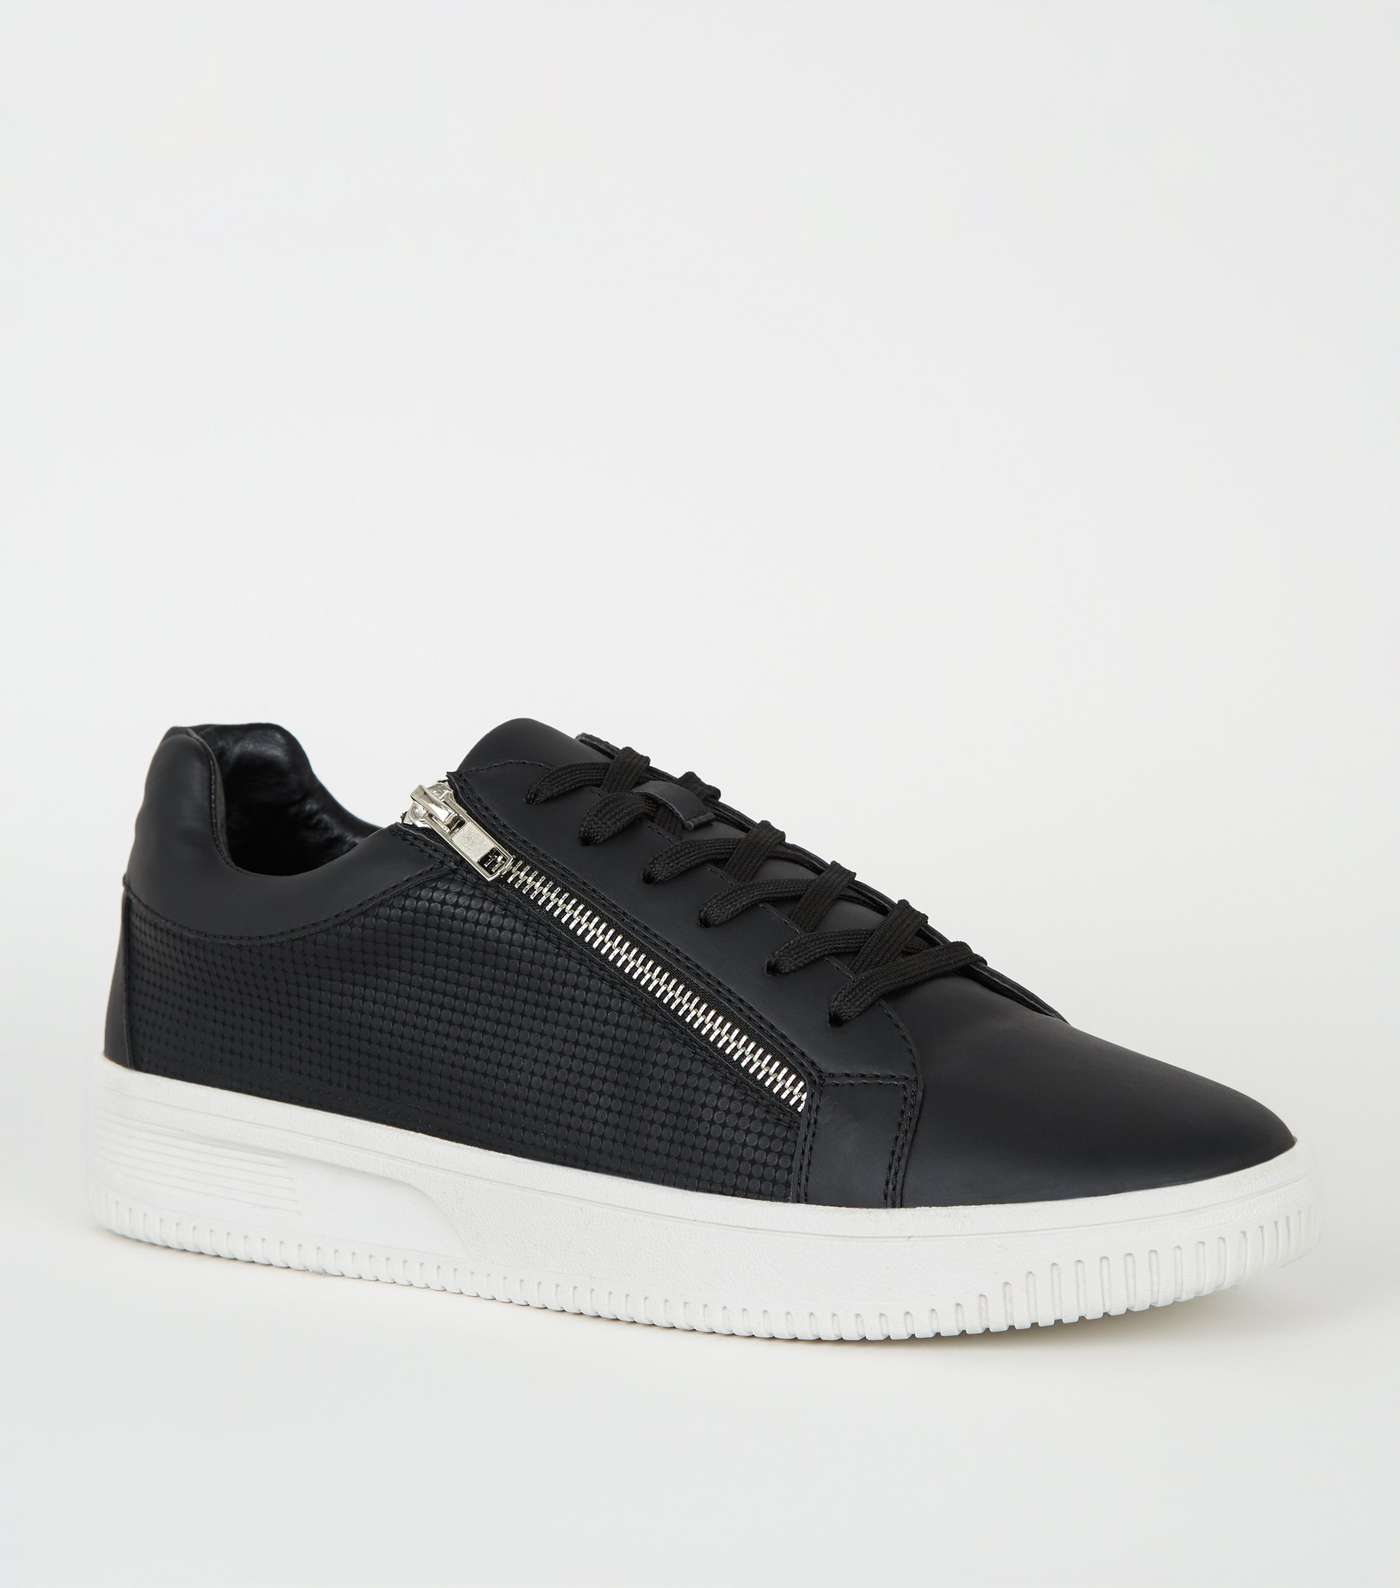 Black Textured Leather-Look Zip Side Trainers